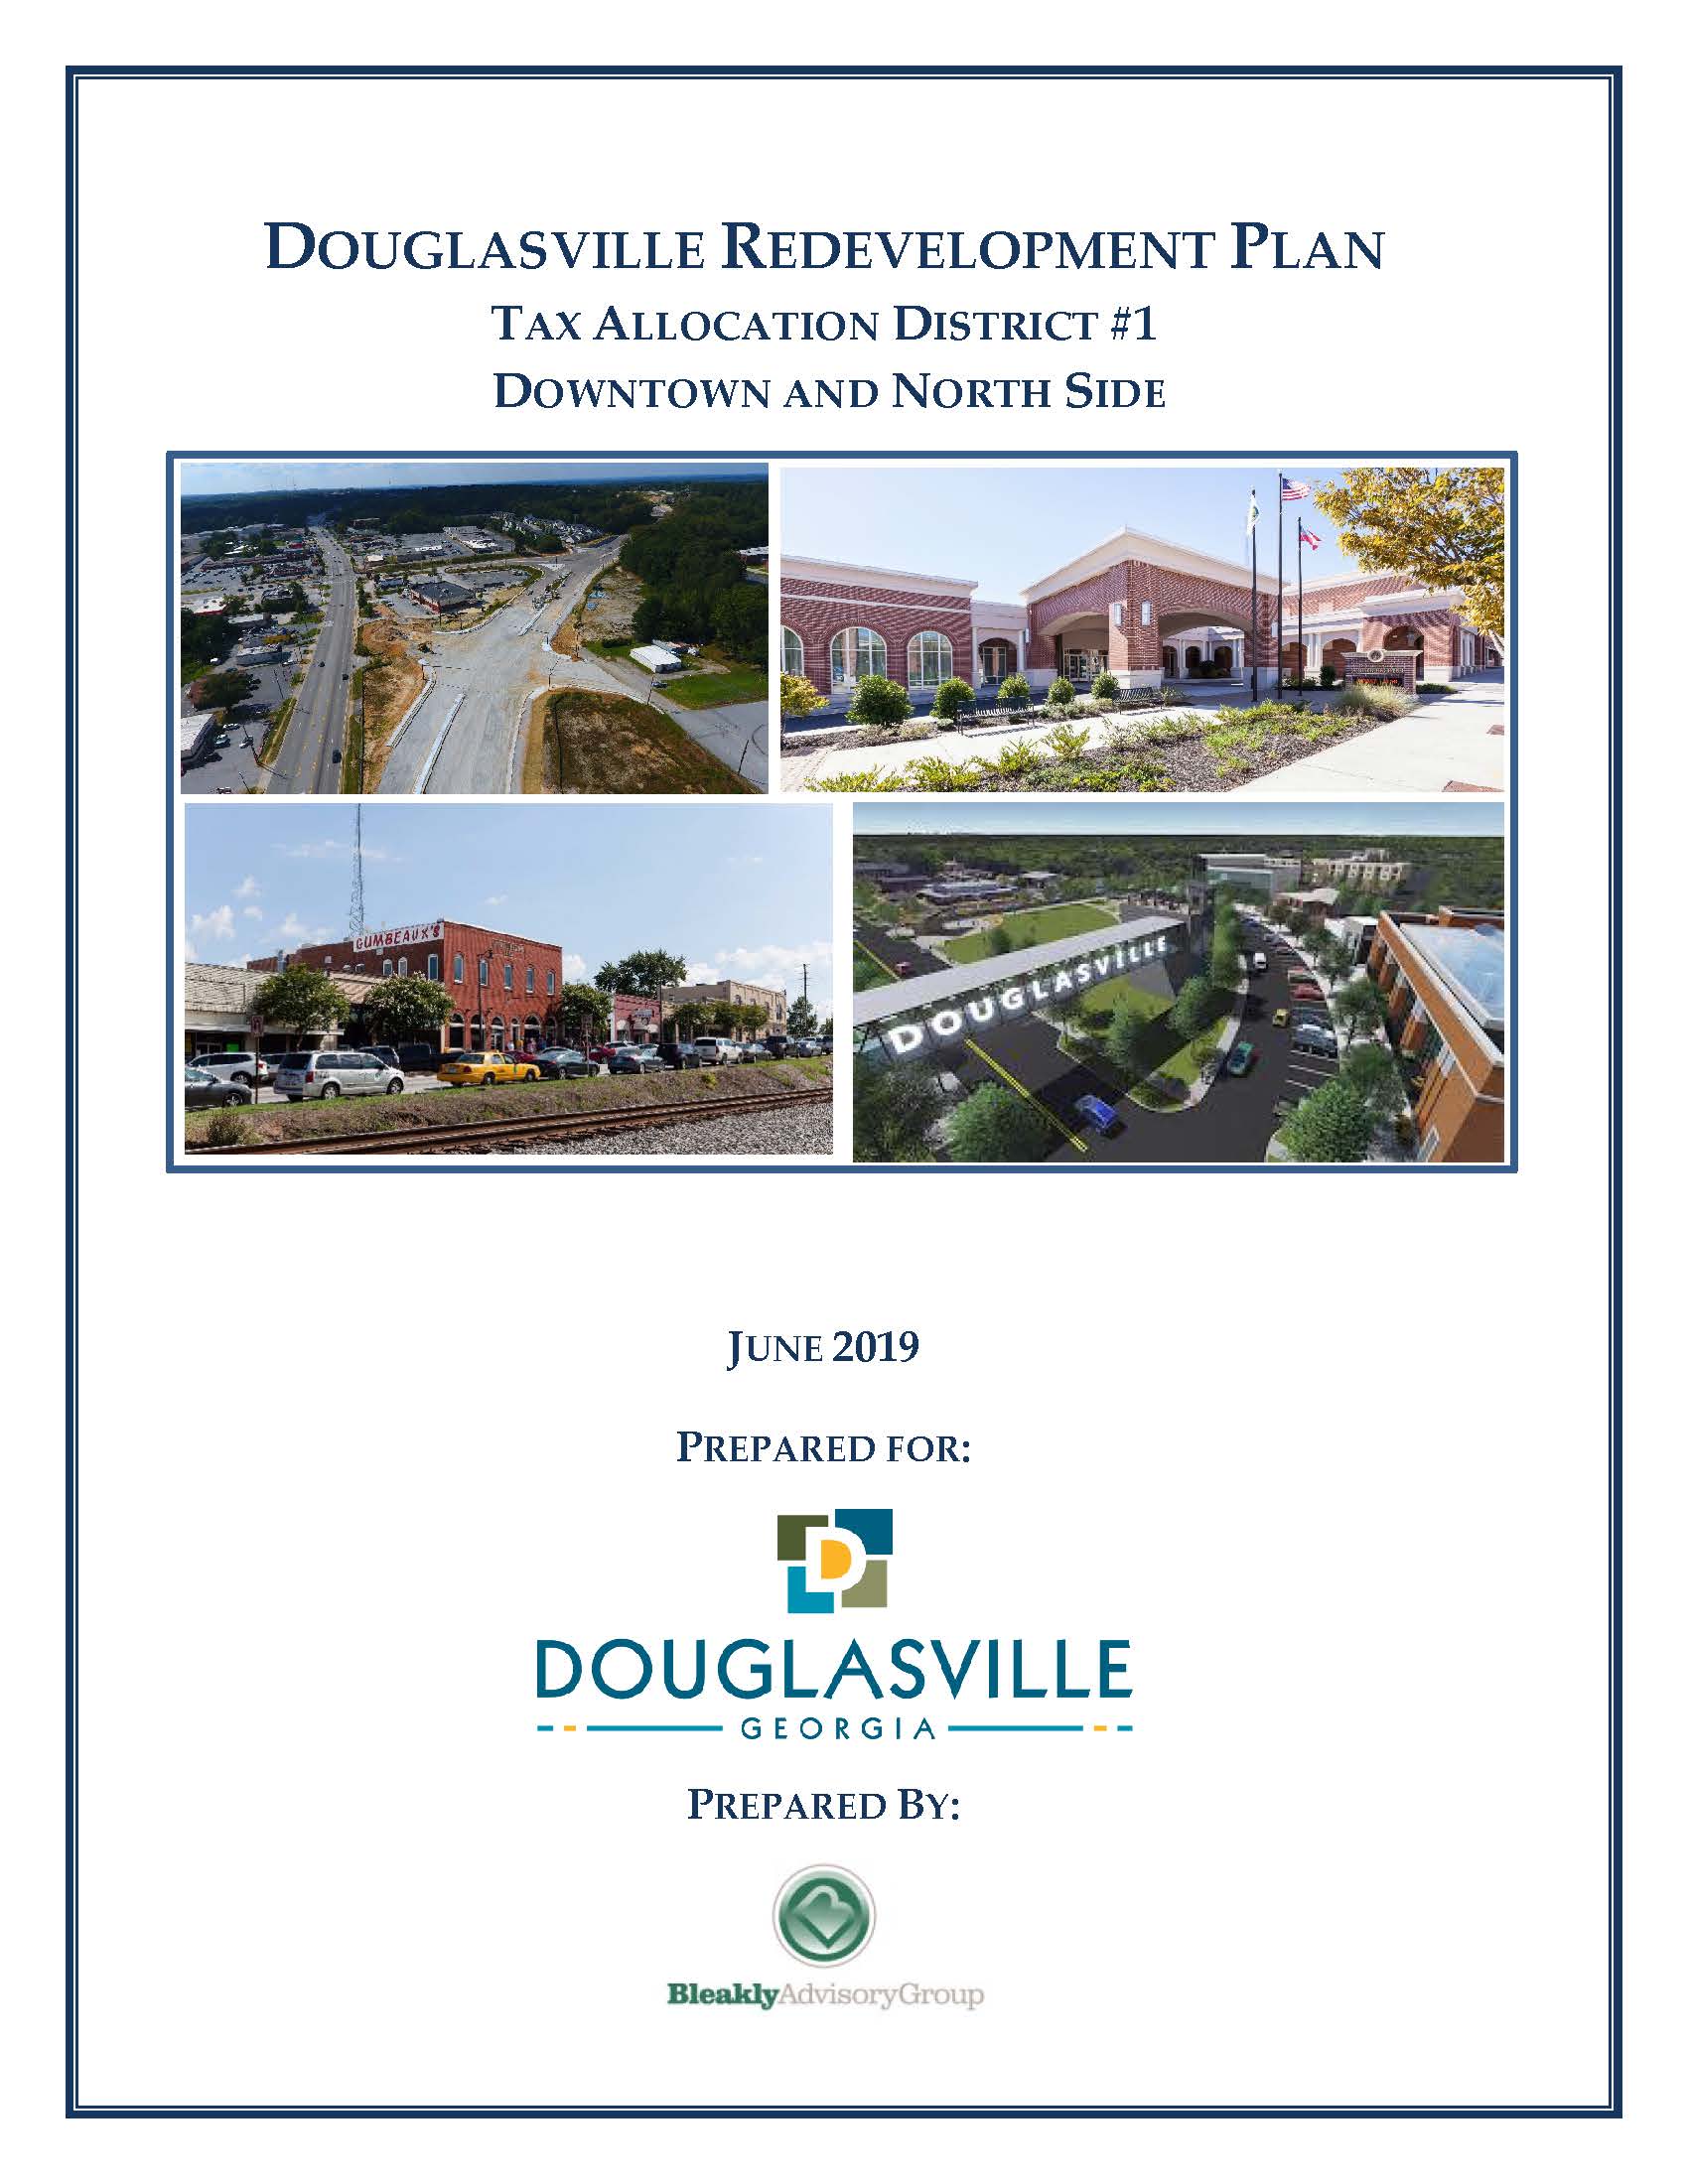 Image of the cover of the Douglasville TAD Redevelopment Plan cover.